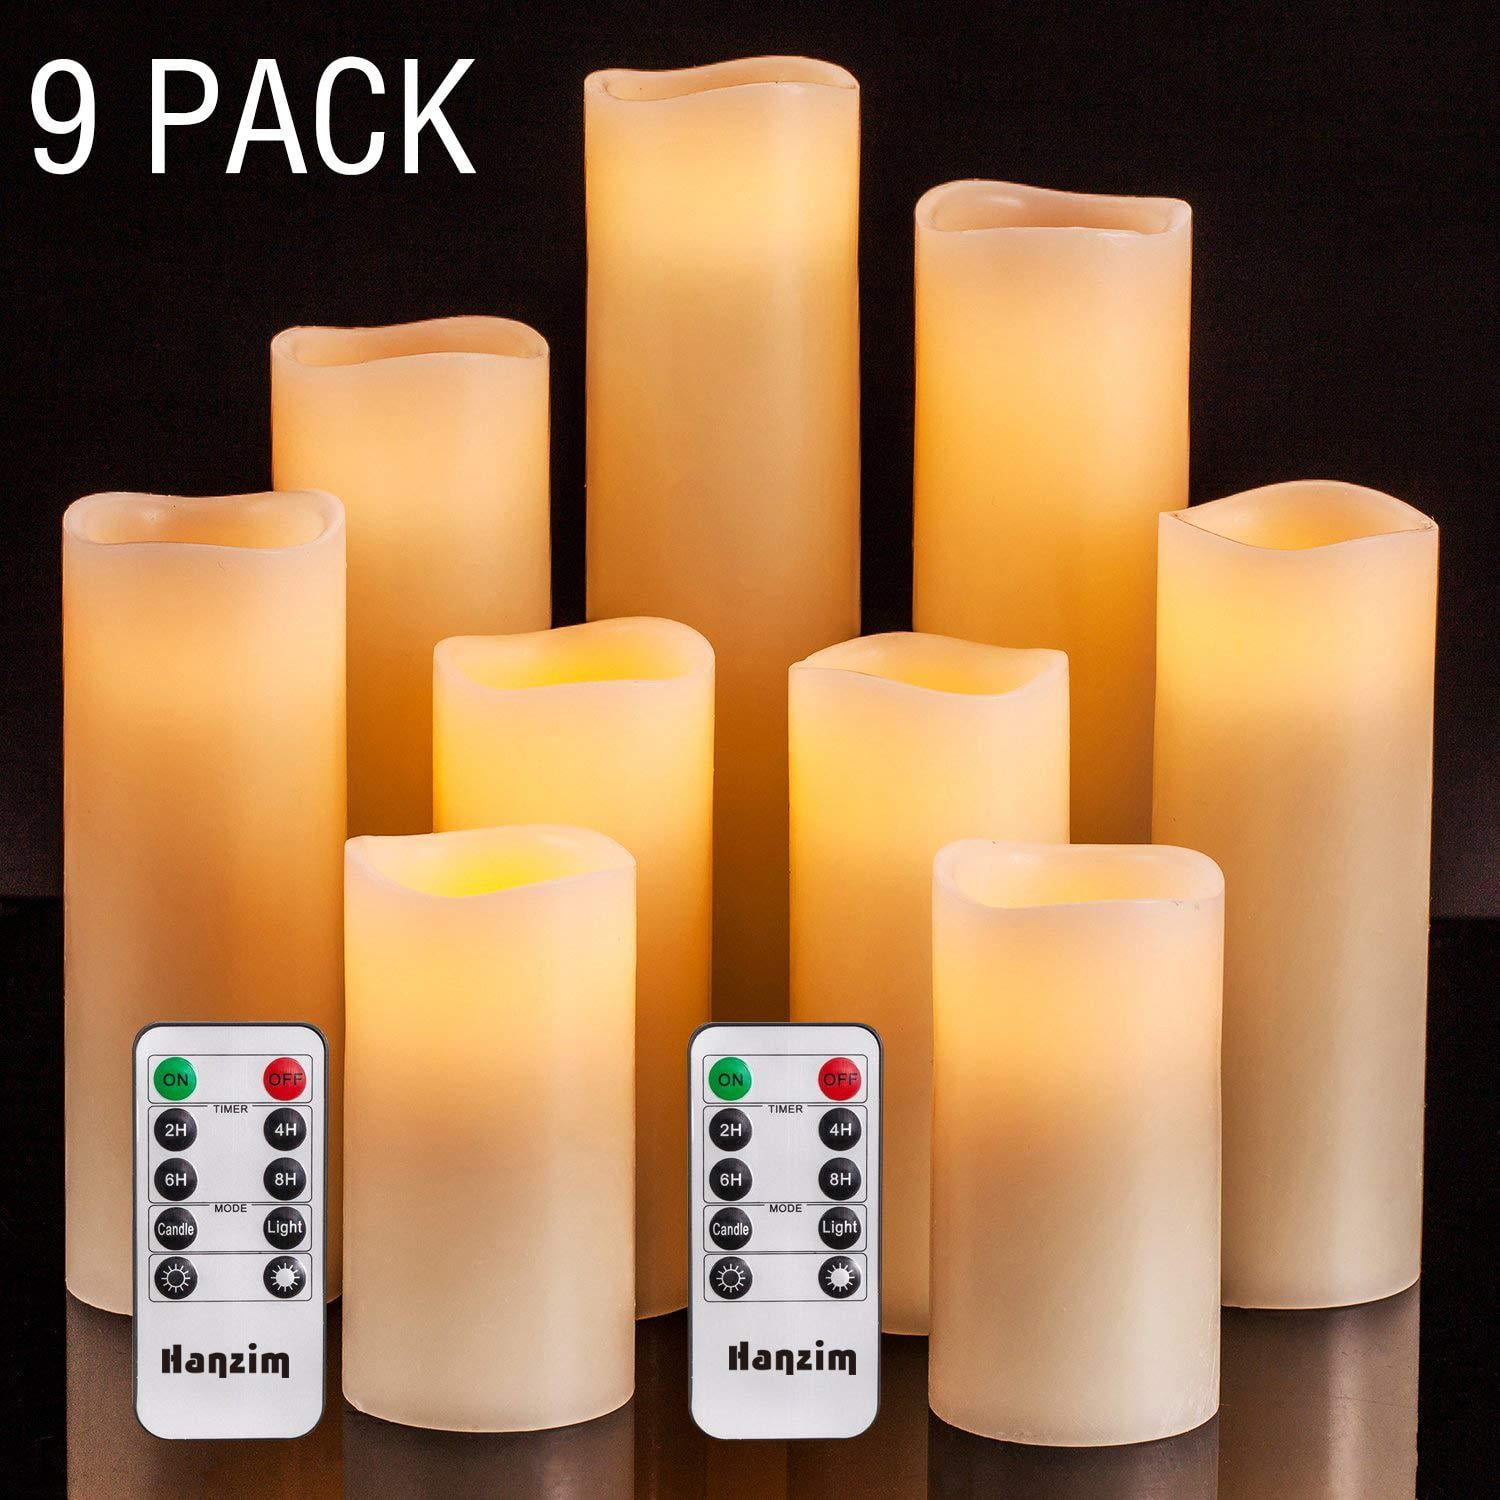 Birch Bark Flameless Taper Candles 2AAA batteries per candle Set of 2 